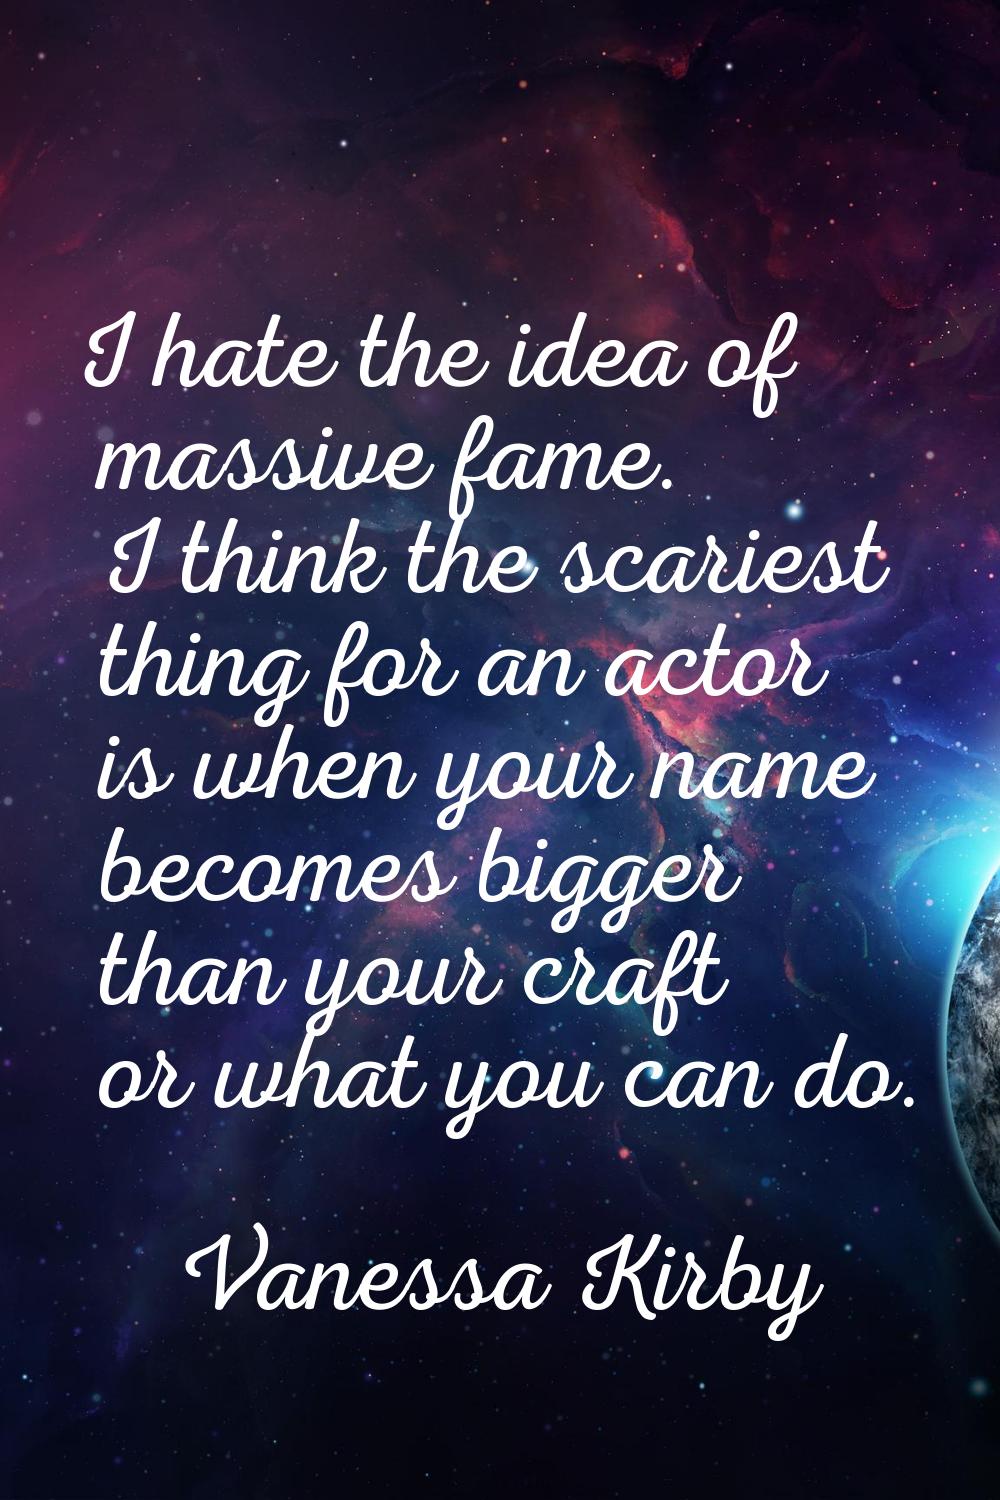 I hate the idea of massive fame. I think the scariest thing for an actor is when your name becomes 